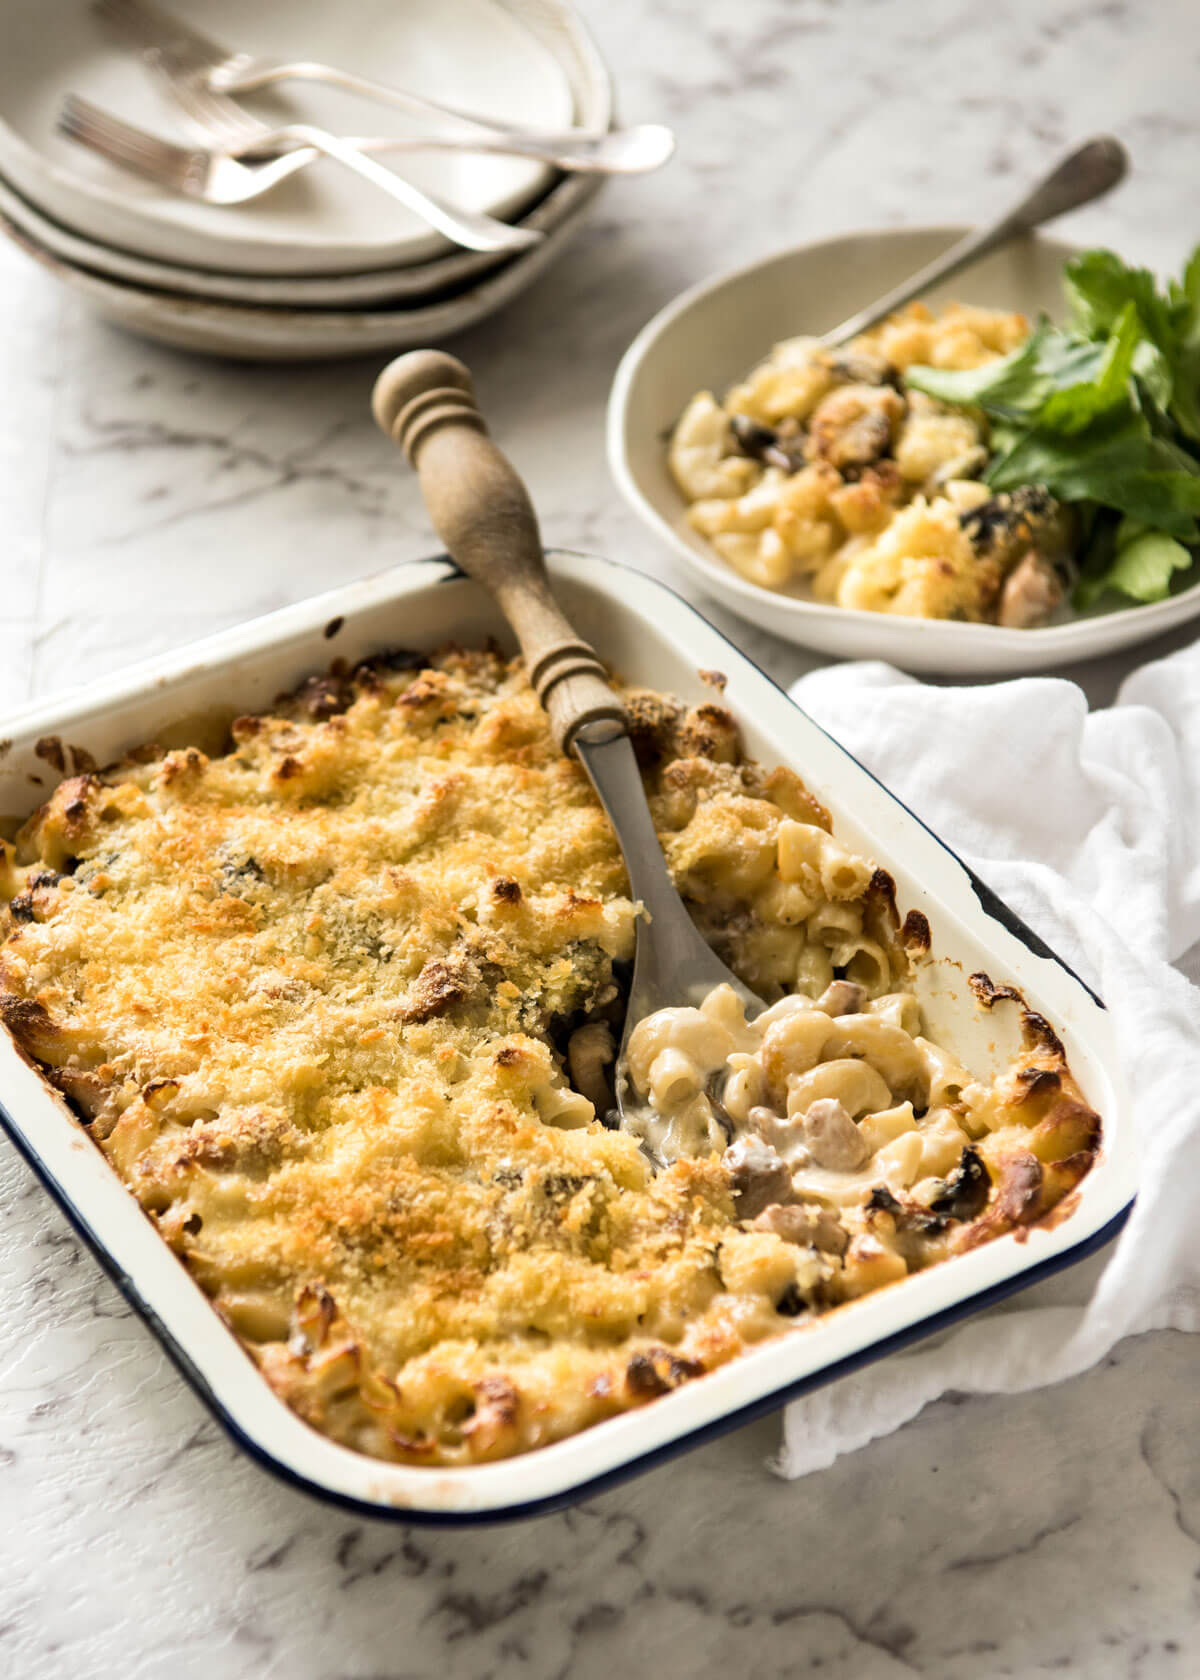 Chicken Macaroni Gratin - A classic Japanese comfort food, this is a creamy pasta bake made with macaroni, chicken, mushrooms and a creamy béchamel sauce. www.japan.recipetineats.com